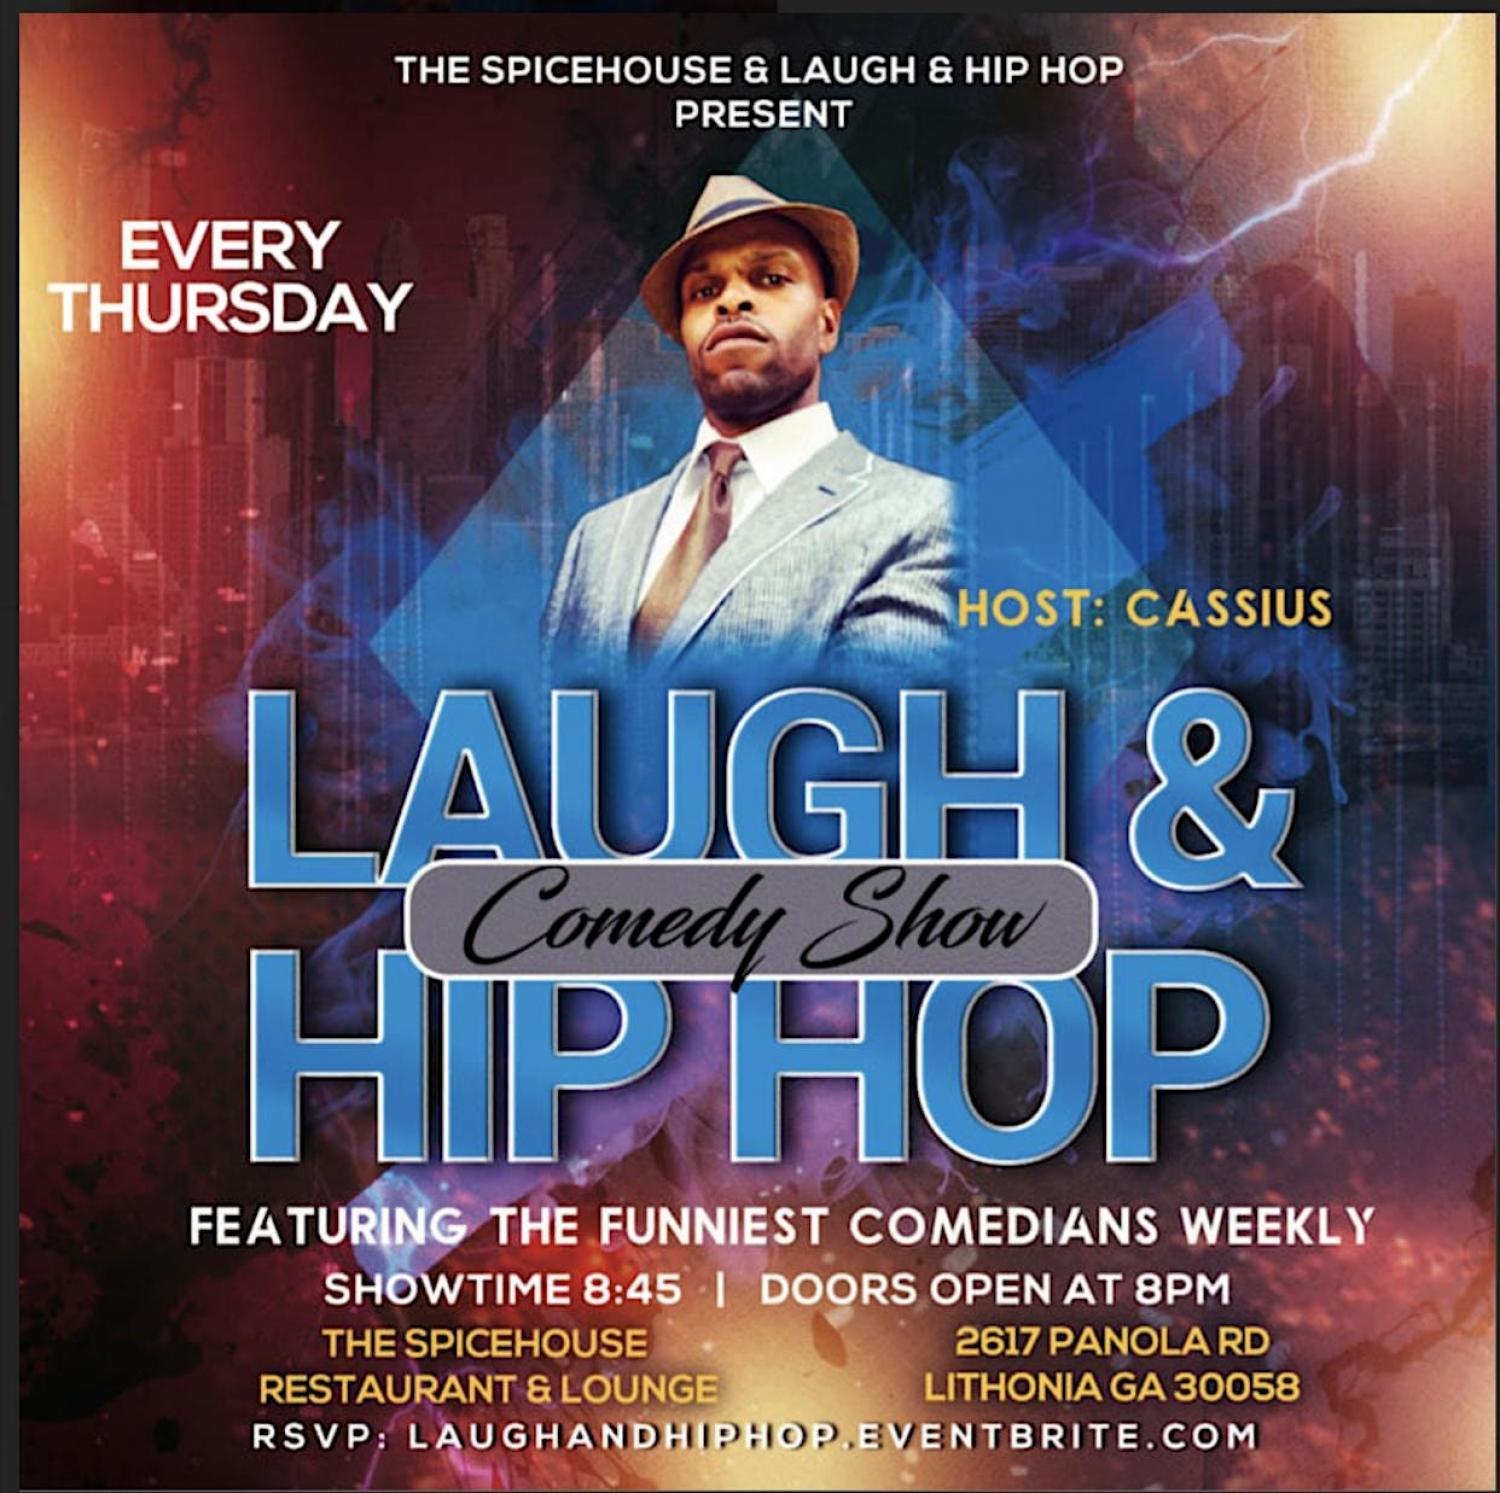 LAUGH & HIP HOP COMEDY SHOW at The Spicehouse
Thu Nov 24, 7:00 PM - Thu Nov 24, 10:00 PM
in 38 days